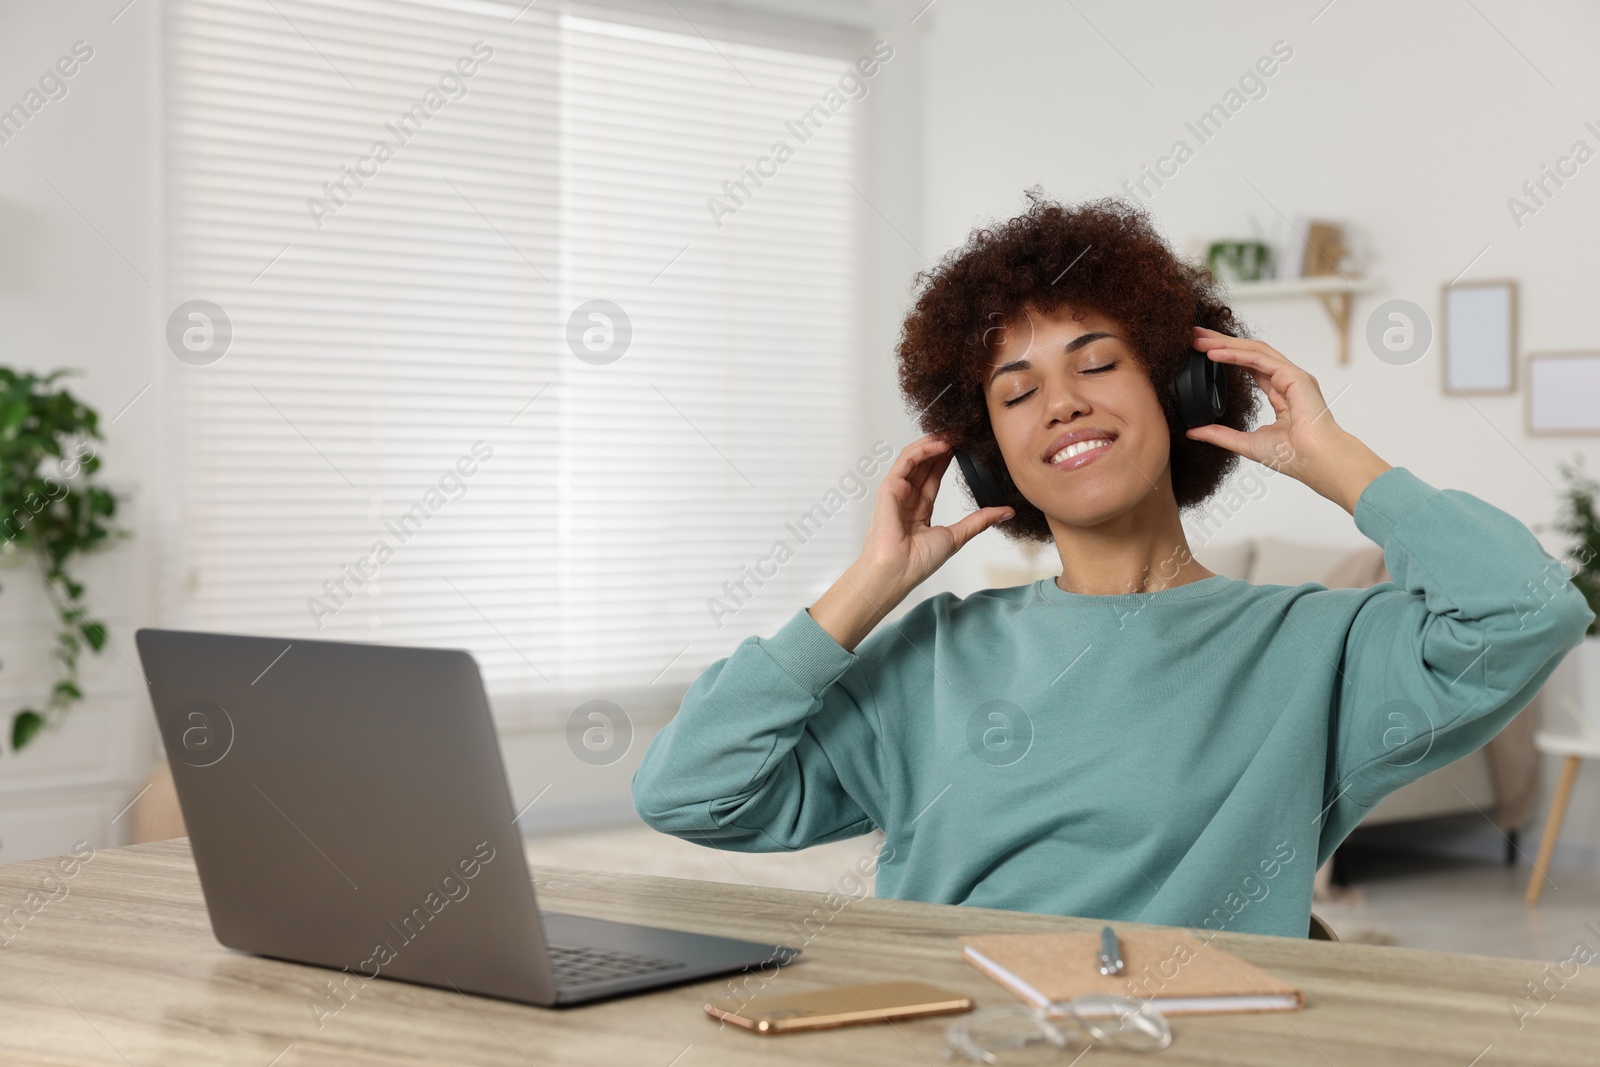 Photo of Young woman in headphones using laptop at wooden desk in room